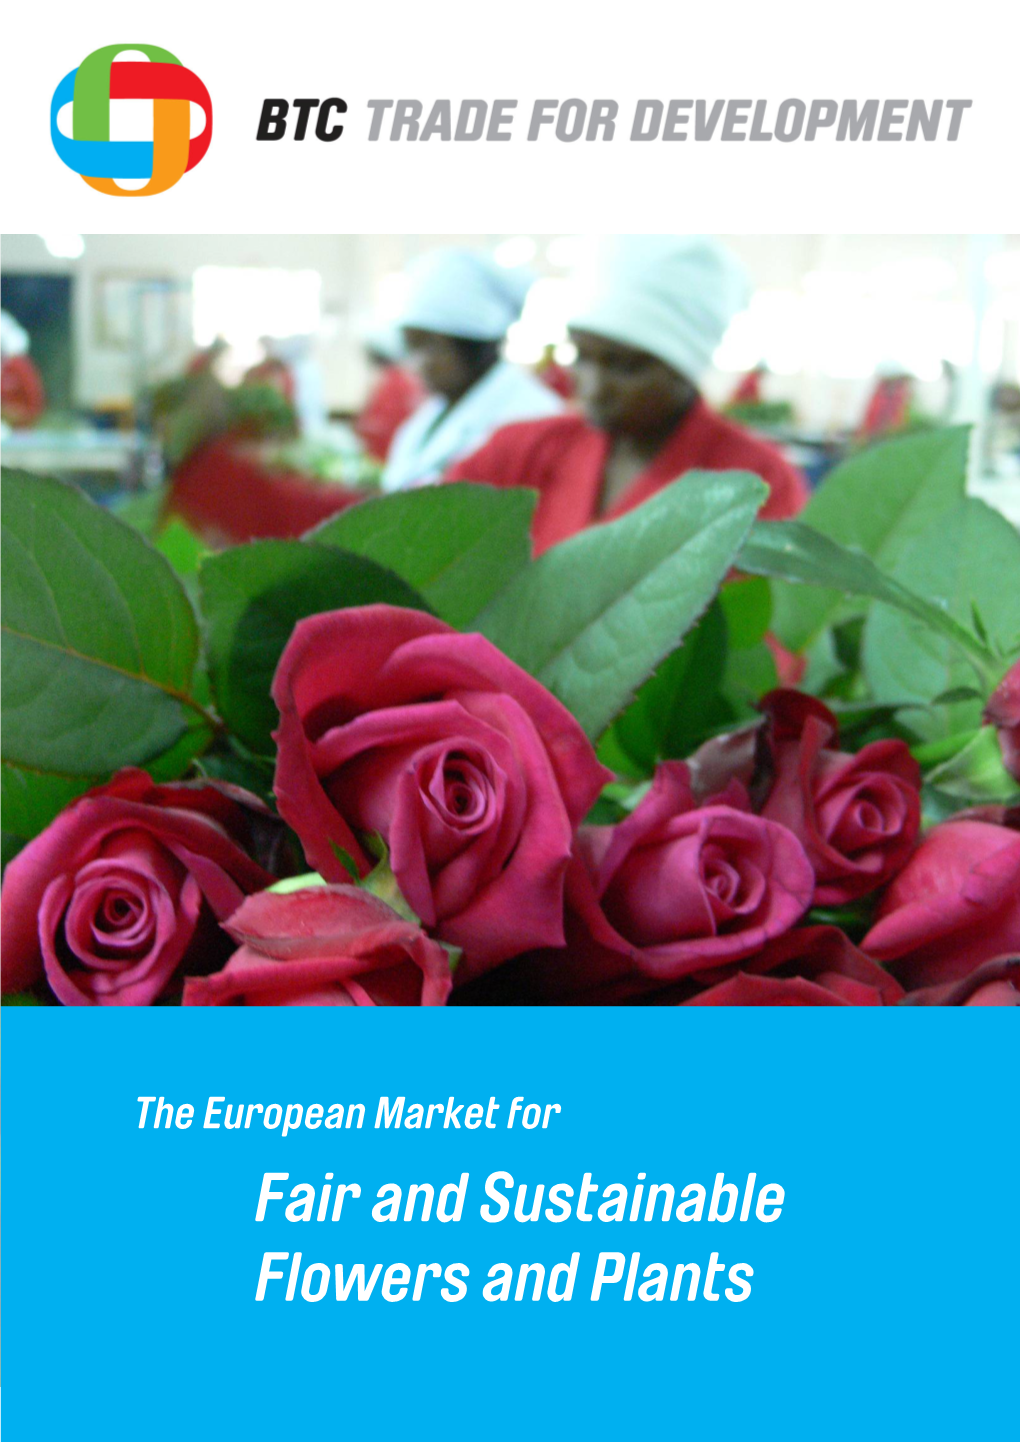 The European Market for Fair and Sustainable Flowers and Plants by Milco Rikken, Proverde December 2010